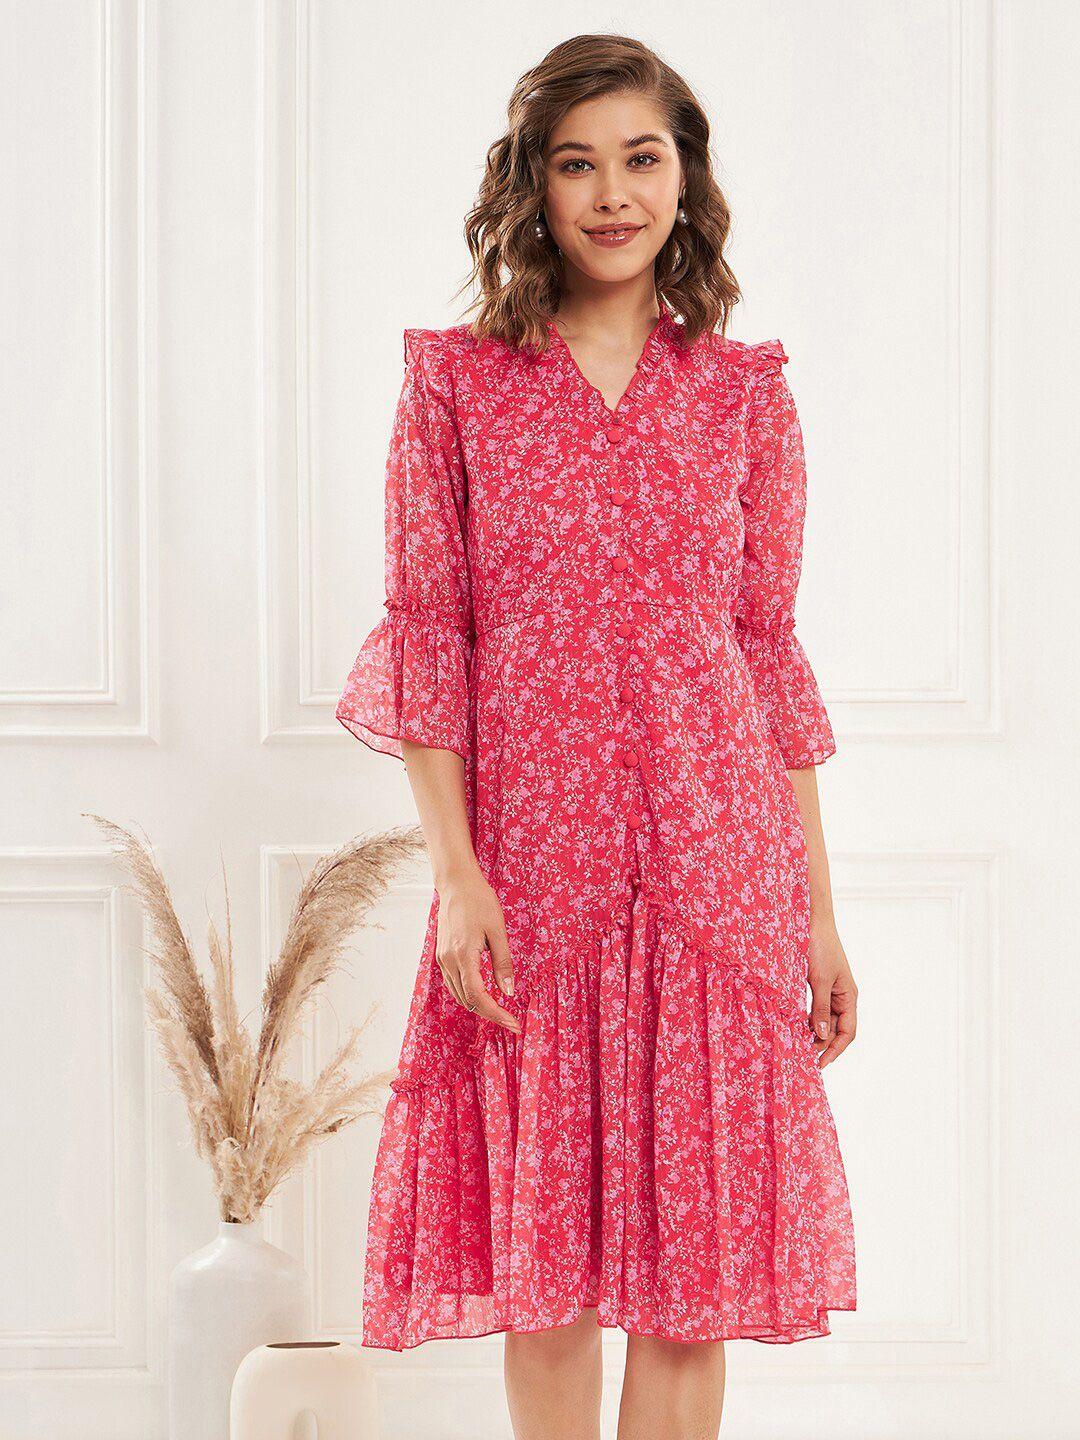 antheaa pink & white floral printed v-neck bell sleeve ruffled chiffon fit & flare dress